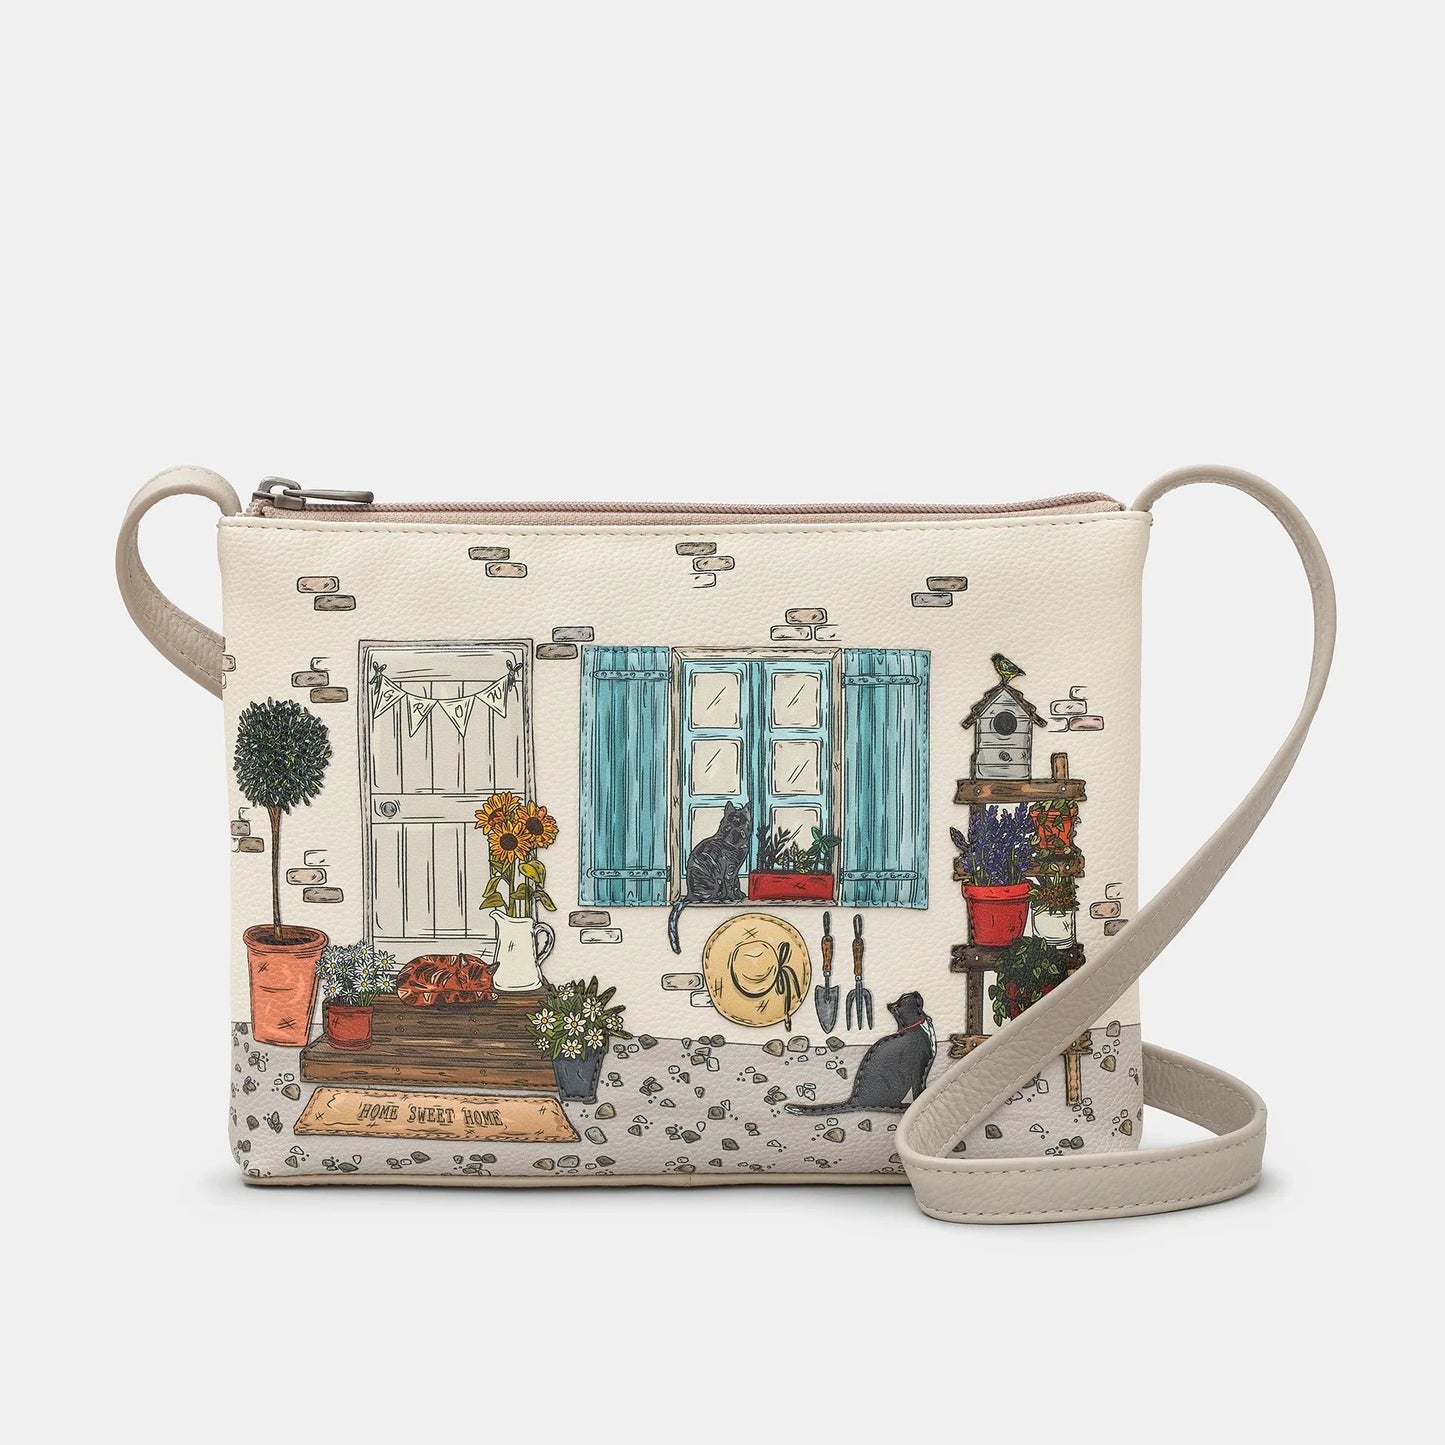 Yoshi YB214 Cats 46 Country Cottage Cross Body Bag